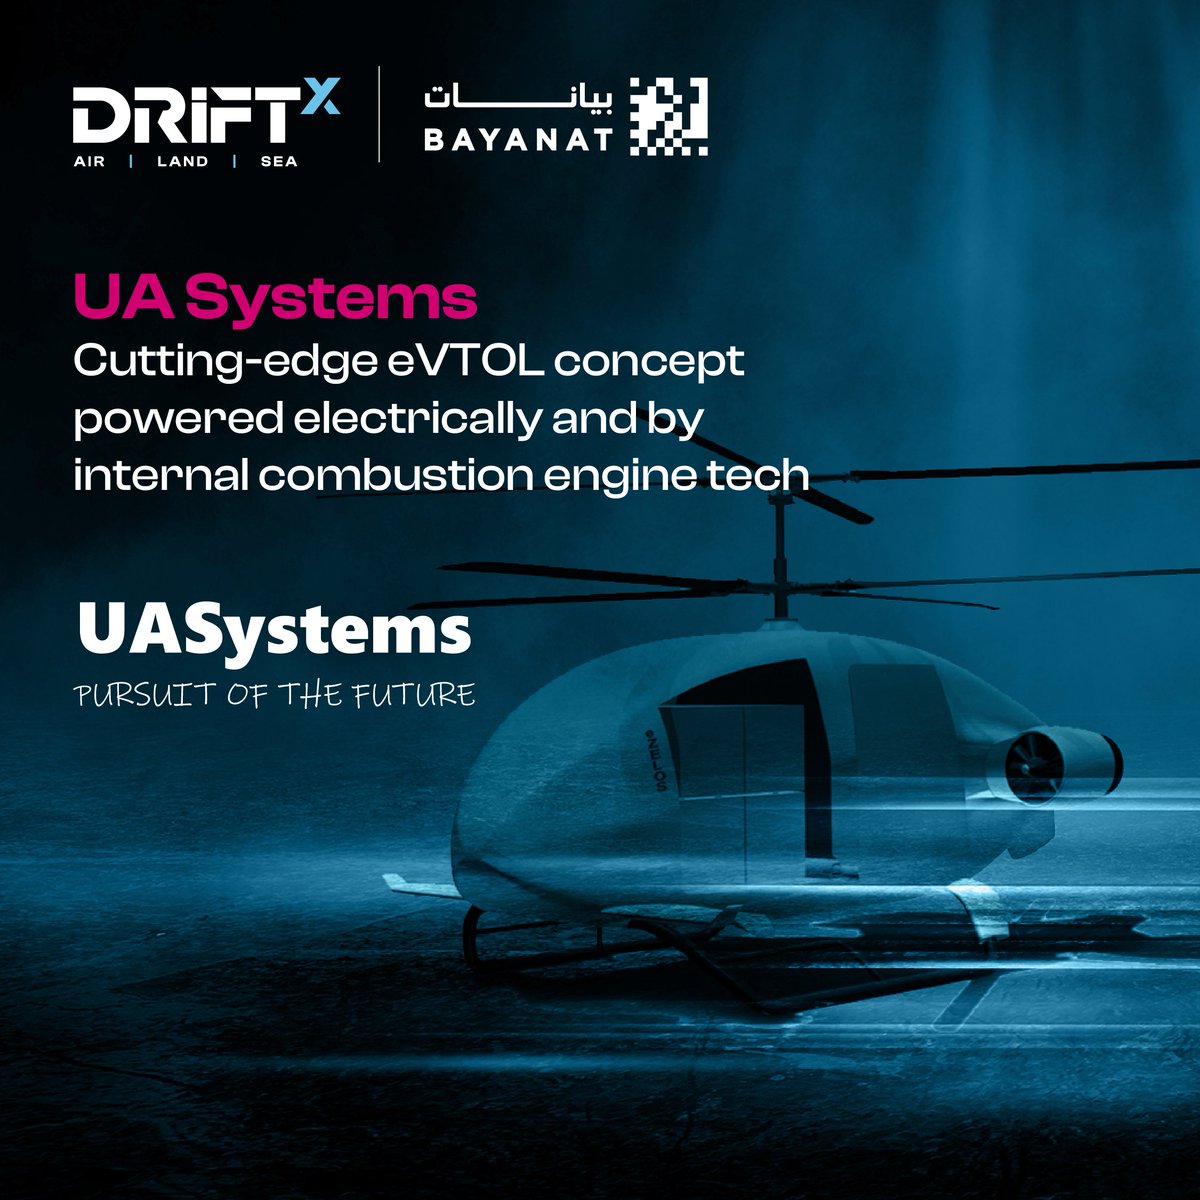 Delve into the realm of autonomous mobility with @Bayanatg42 at DRIFTx! Prepare to be impressed by an electrifying display of cutting-edge showcases and live demonstrations. @InvestAbuDhabi @saviabudhabi @AbuDhabiDMT